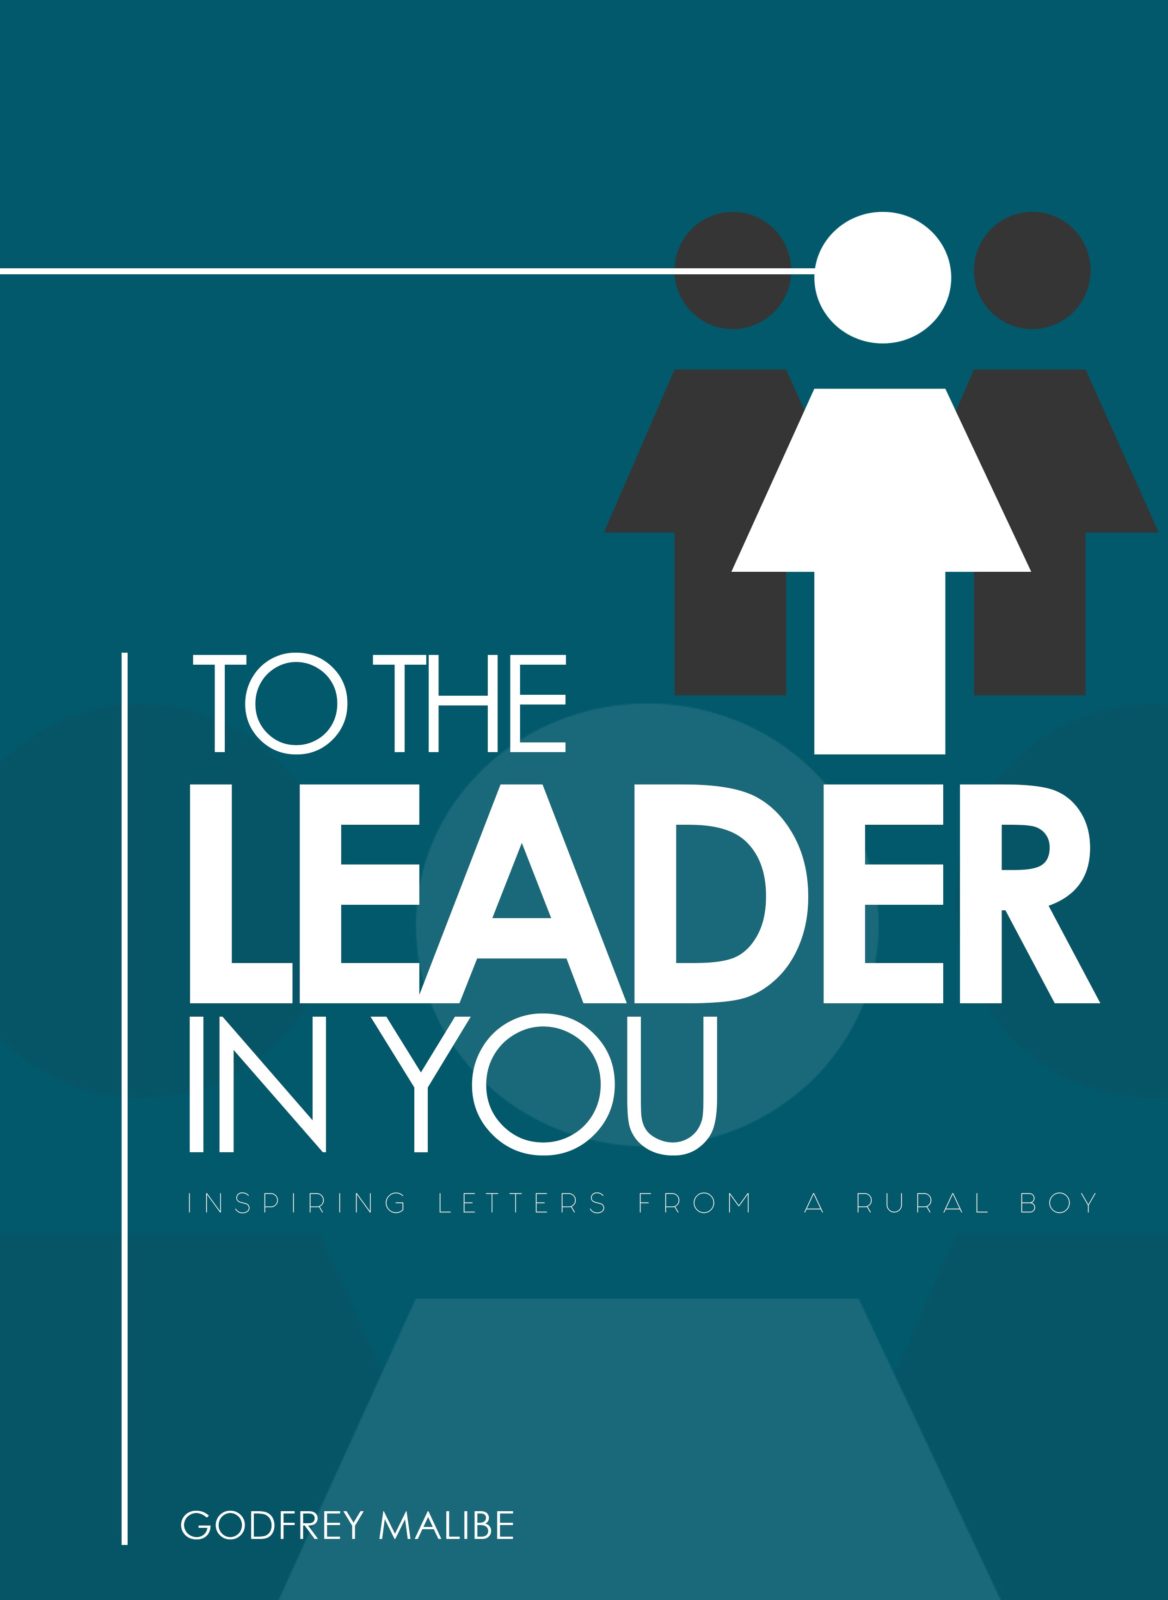 To The Leader In You by Godfrey Malibe